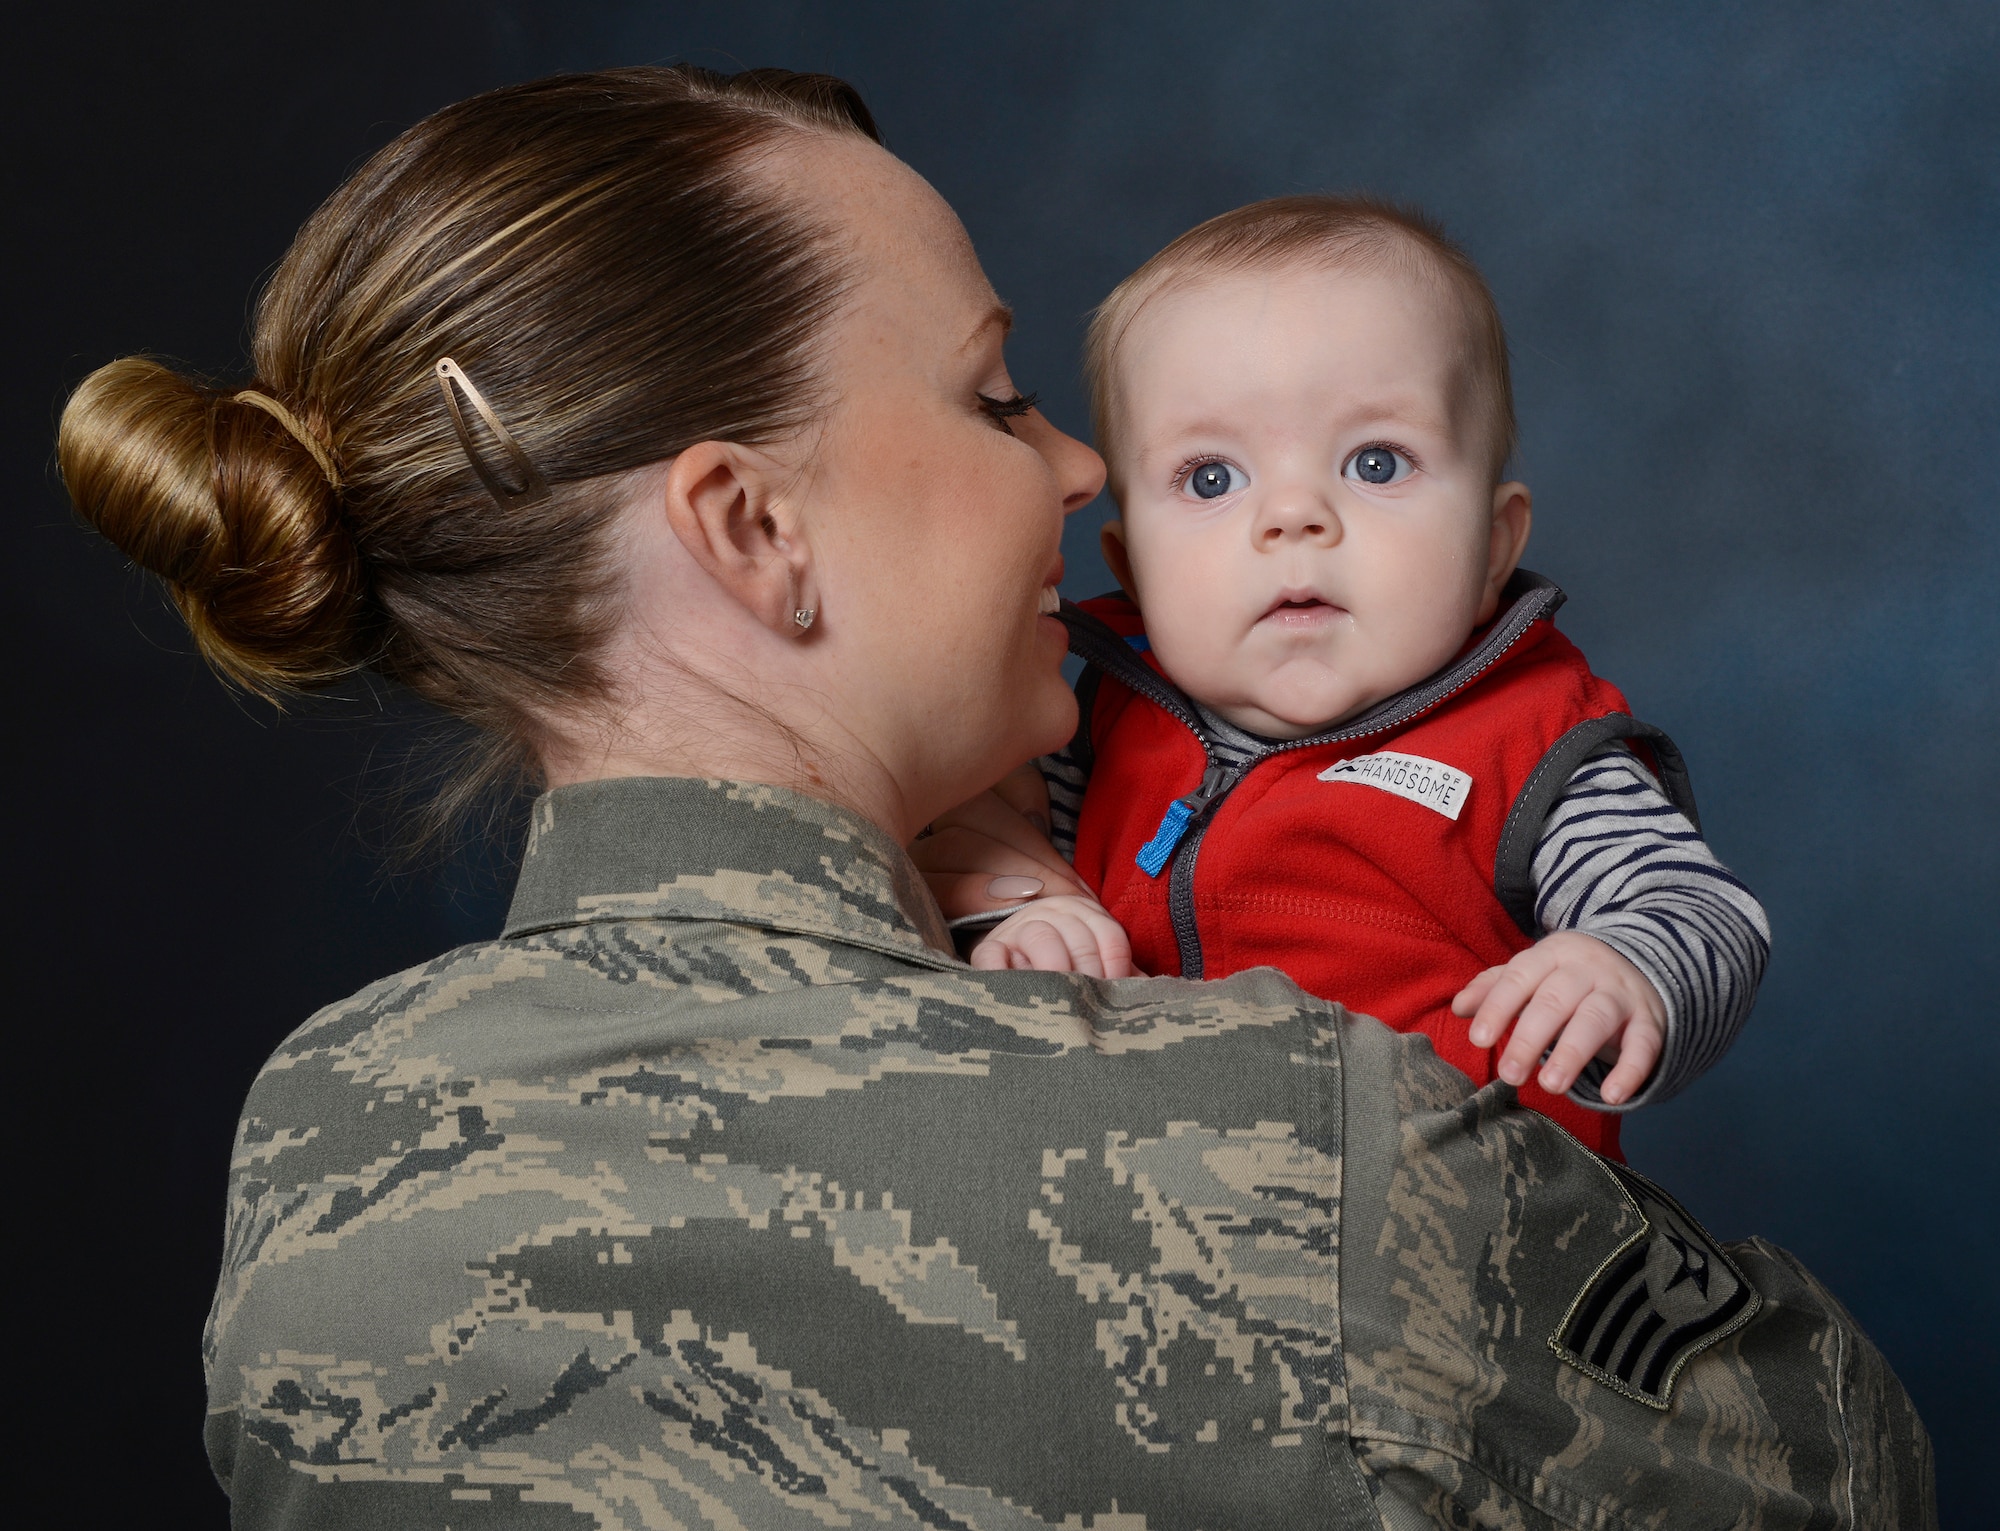 Staff Sgt. Leslie Baccus, 341st Medical Support Squadron, NCO in charge of laboratory shipping, and son, William, pose together. In 2015, women in the Air Force were authorized one year from the birth of a child to be exempt from deployments and return to physical fitness standards.  This year the Pentagon set maternity leave to 12 weeks across the Department of Defense. (U.S. Air Force photo/Staff Sgt. Delia Marchick)